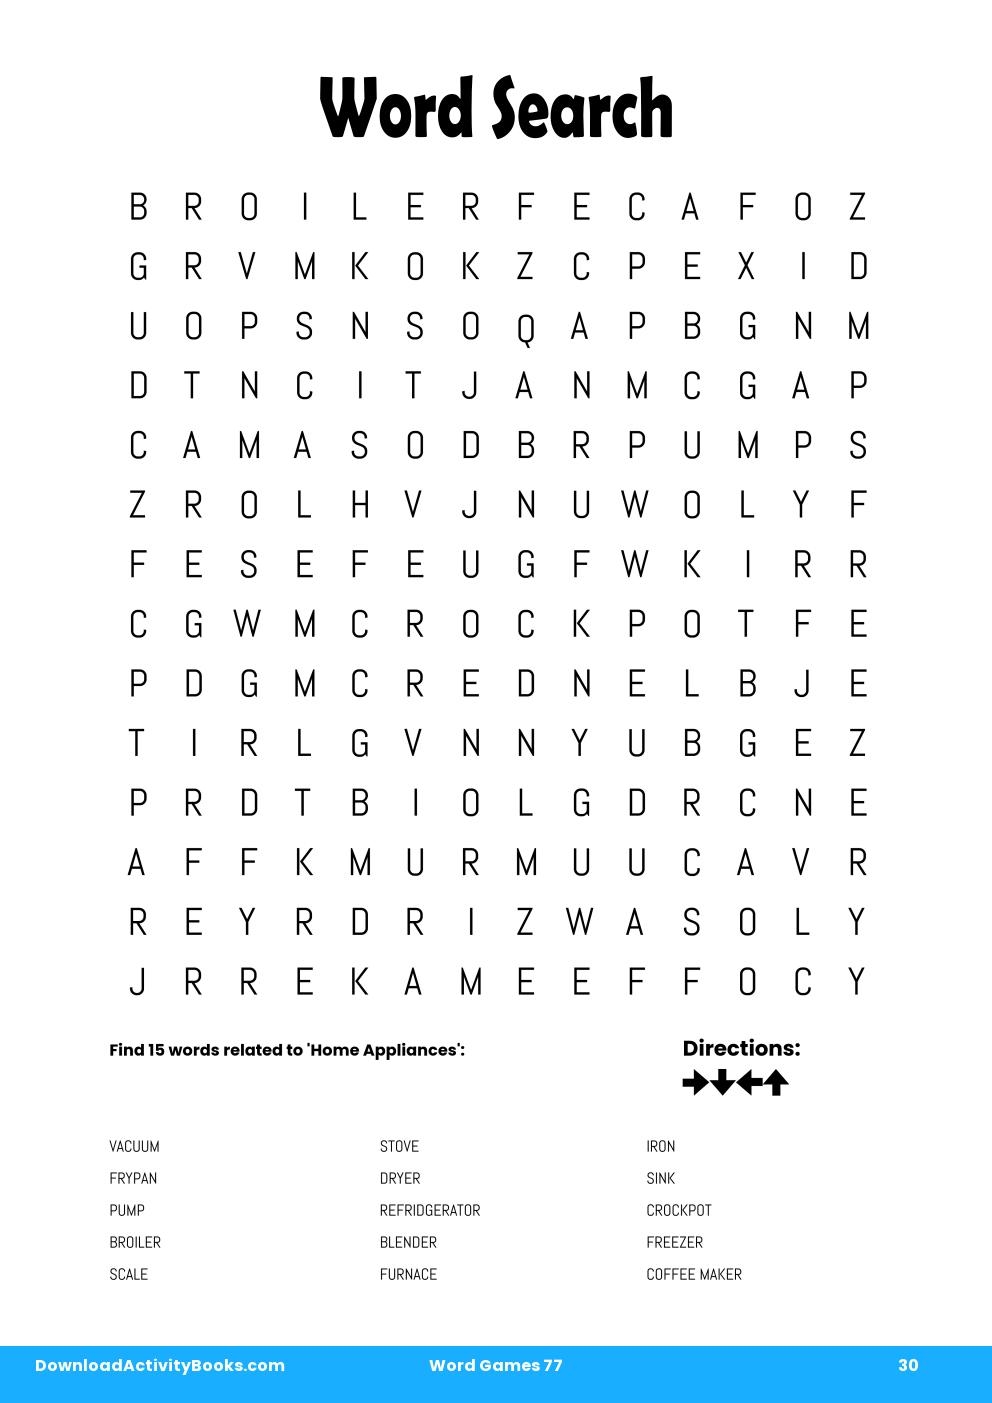 Word Search in Word Games 77